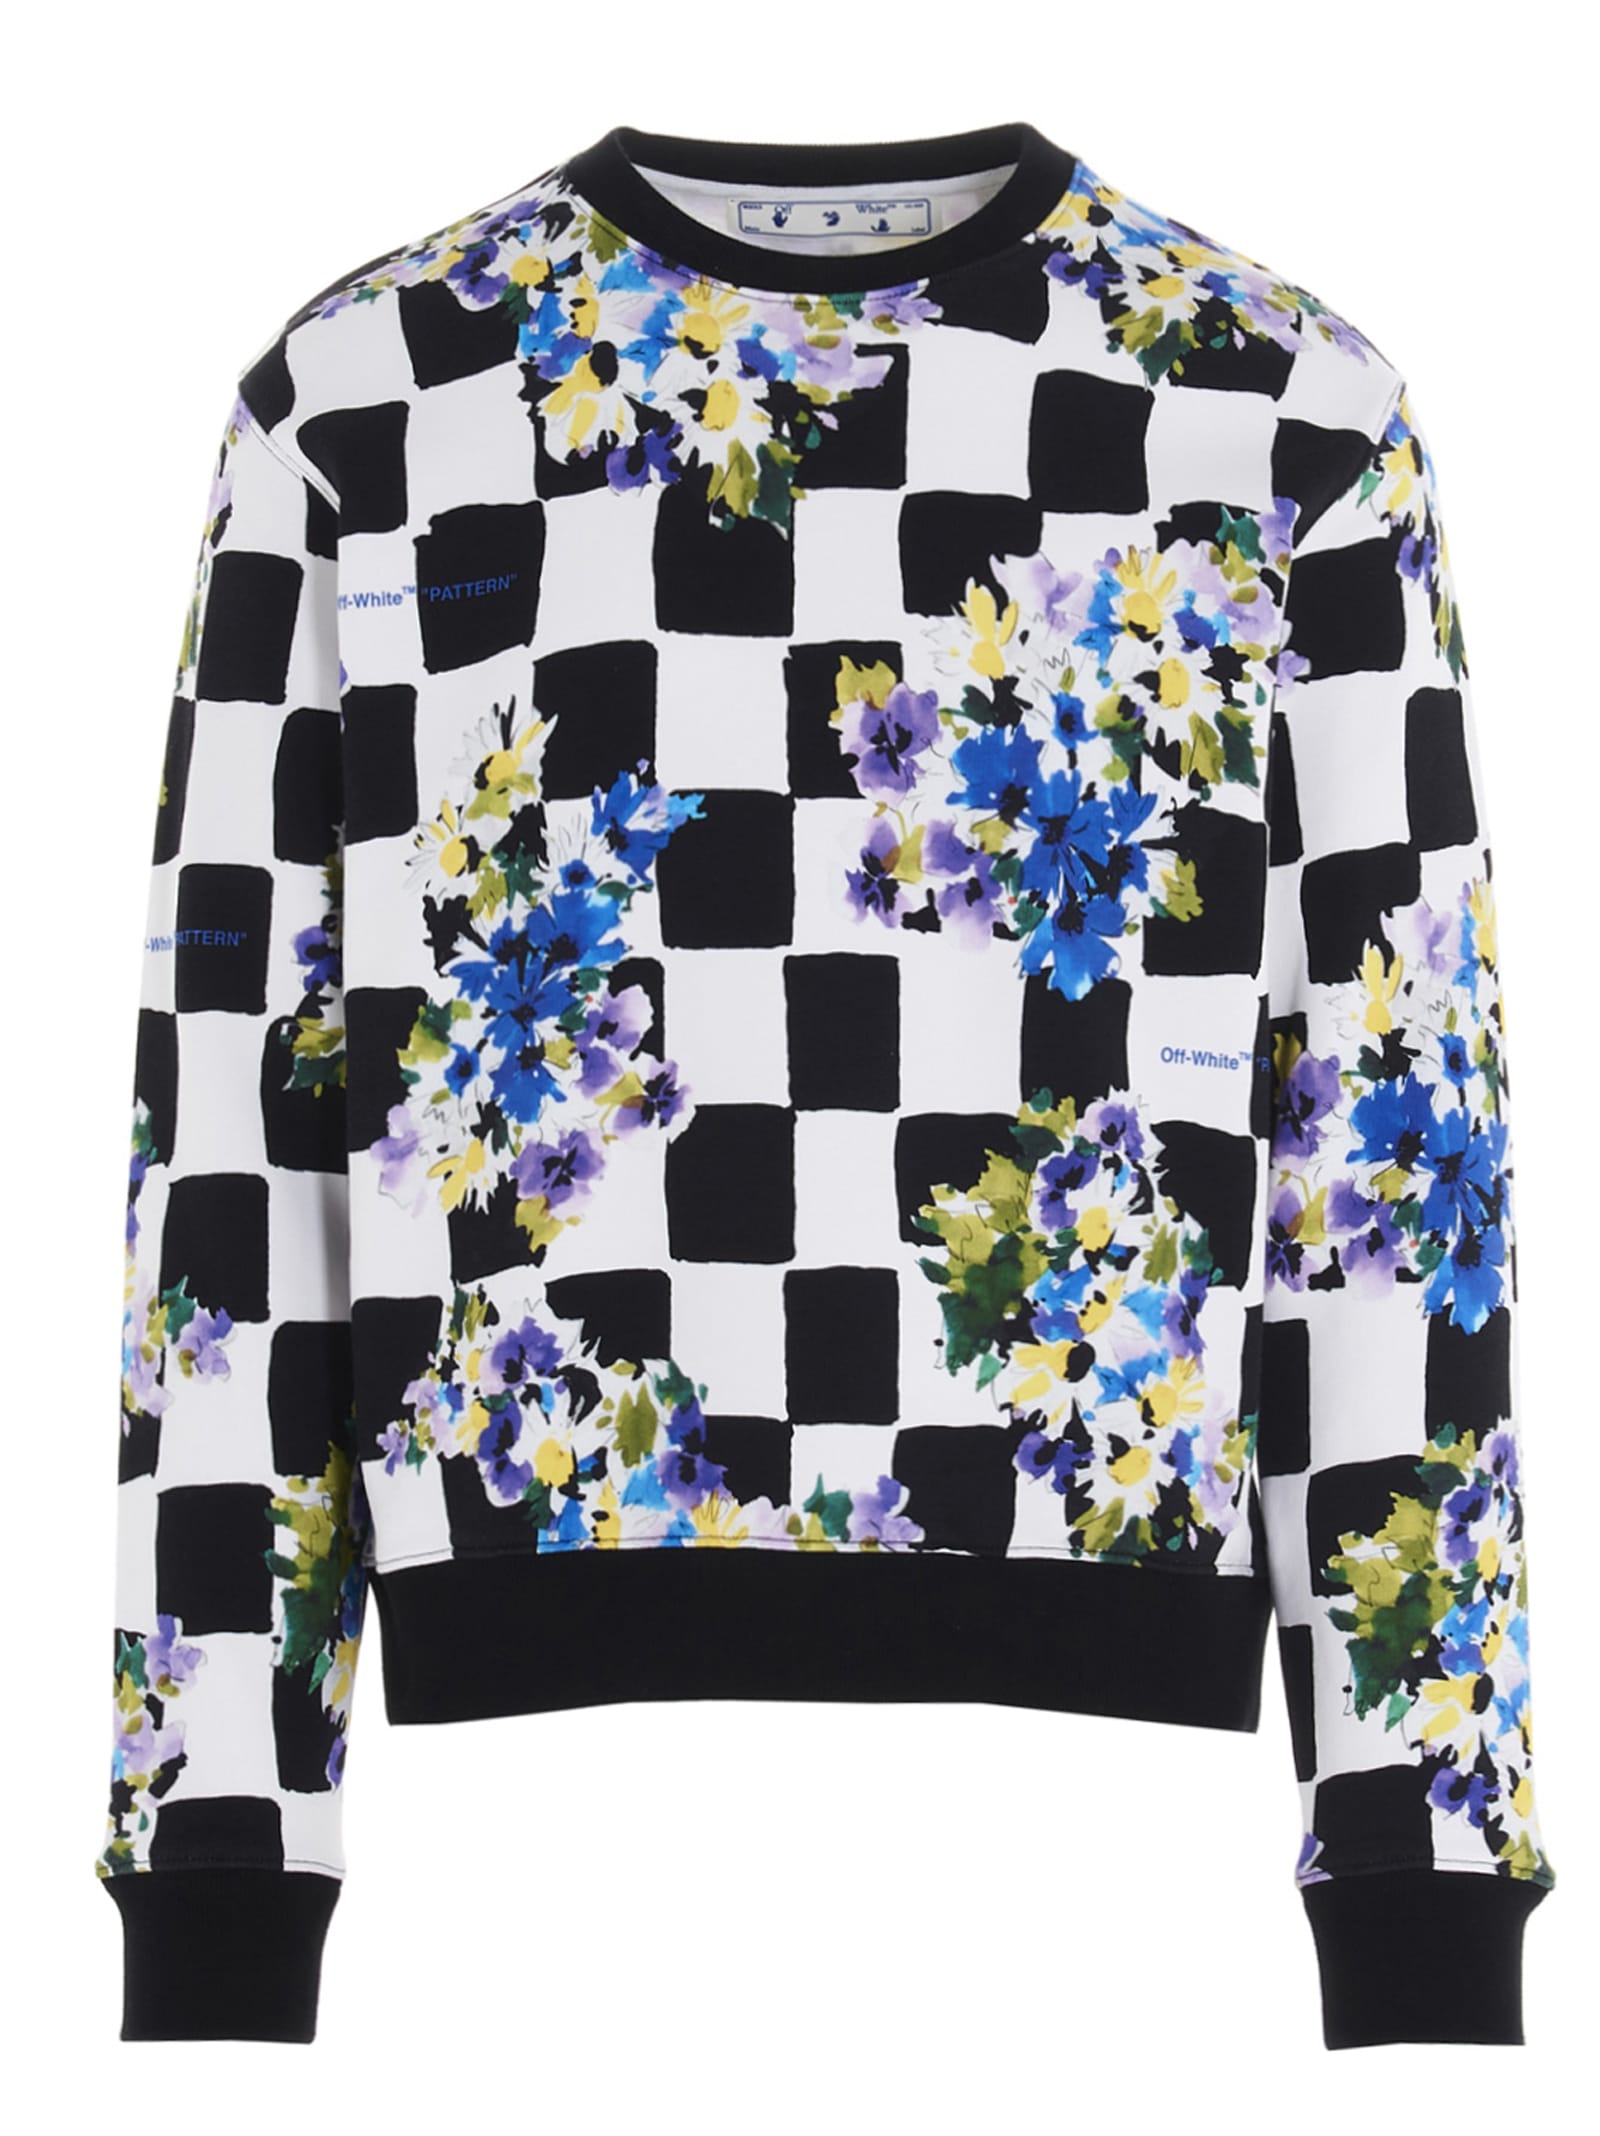 OFF-WHITE OFF-WHITE CHECK FLOWERS SWEATSHIRT,OMBA025S21FLE0188400 8400